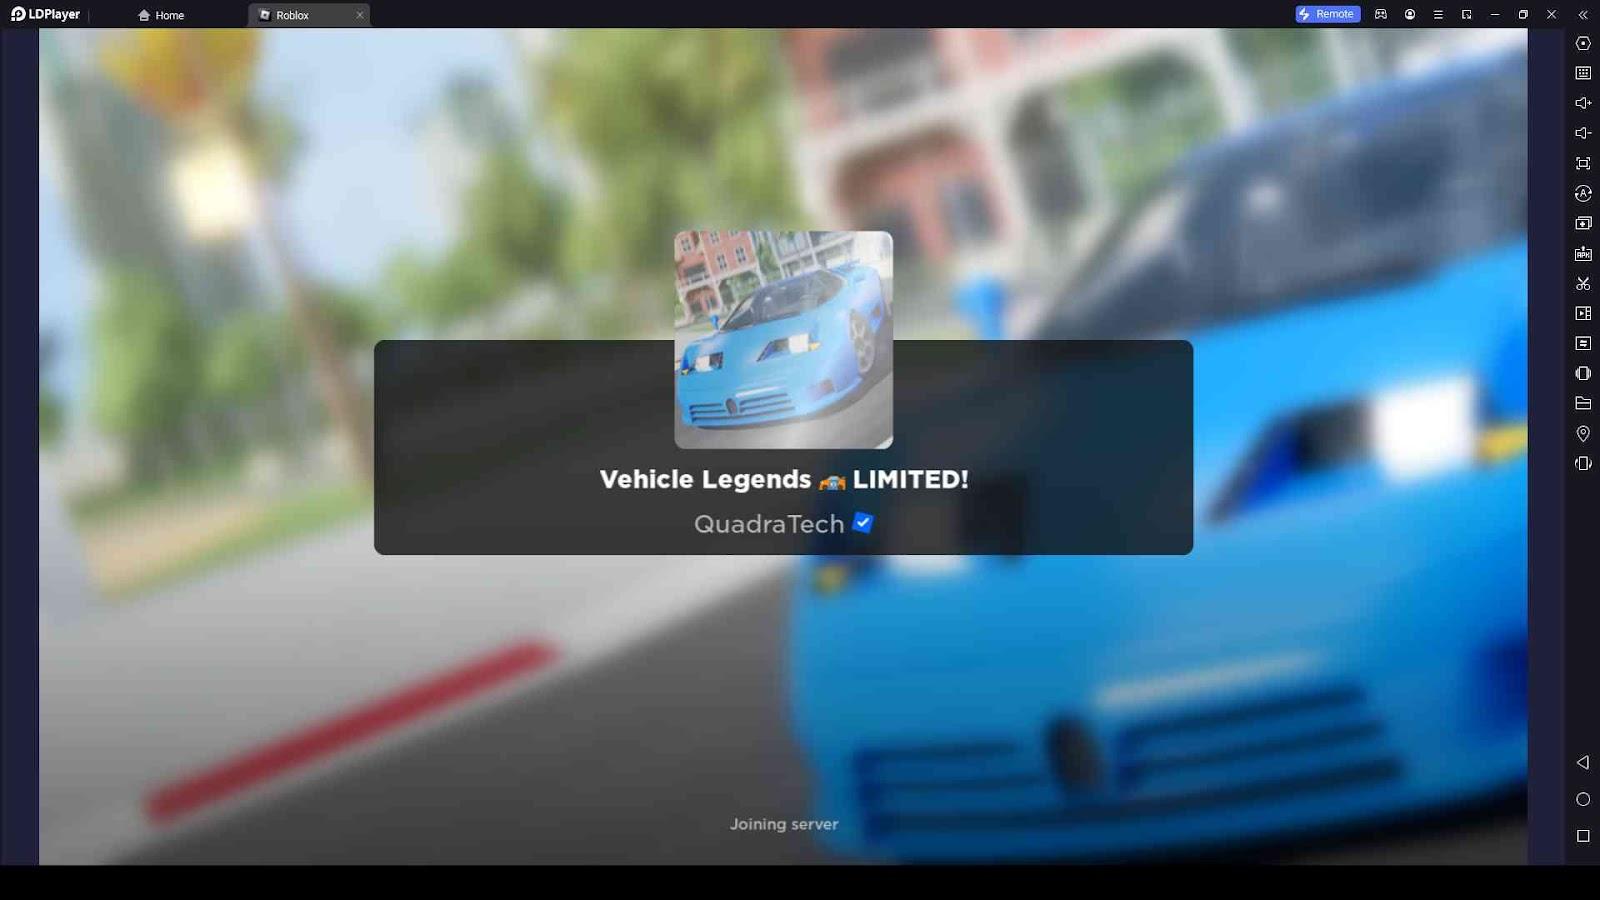 How to enter Vehicle Legends Roblox codes - Quora